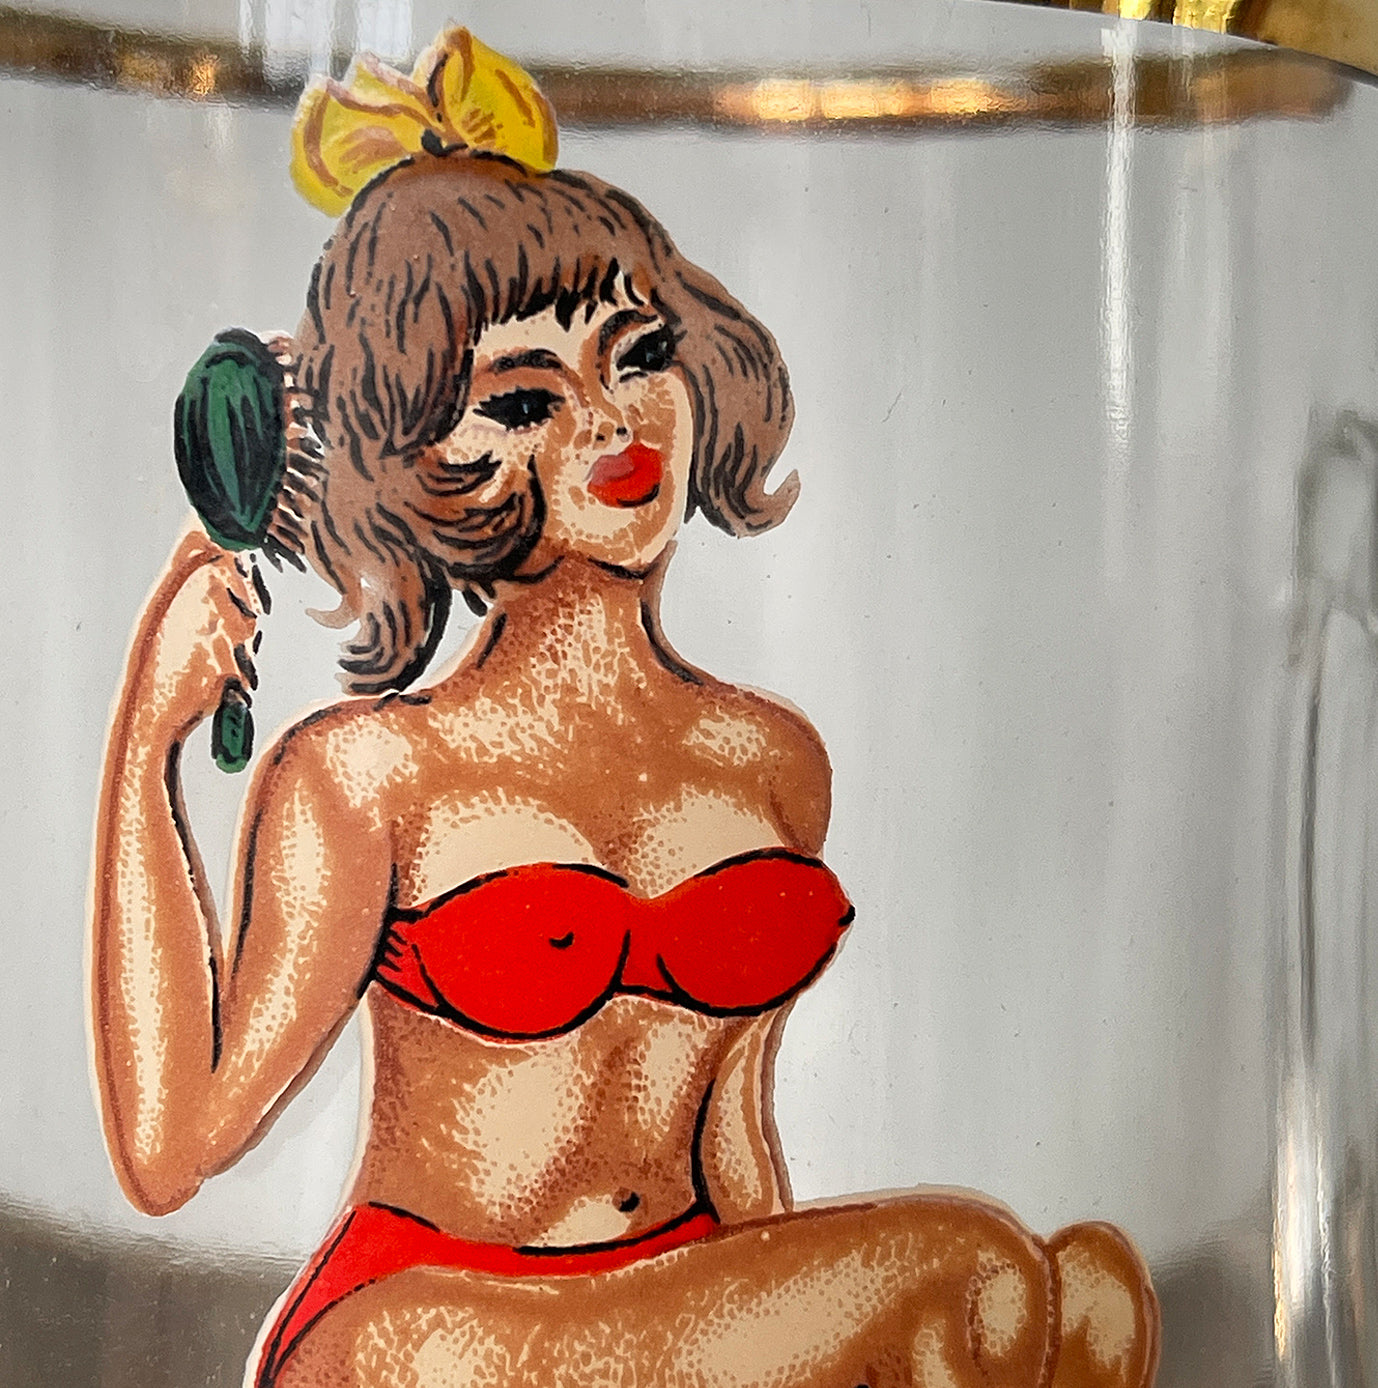 A Super Kitsch Vintage Prince William Ware Tankard with a naughty secret! On the front of a glass the young lady is wearing a red bikini sitting on a stool brushing her hair, turn it round and her bikini disappears and she's sitting there in her birthday suit! - SHOP NOW - www.intovintage.co.uk